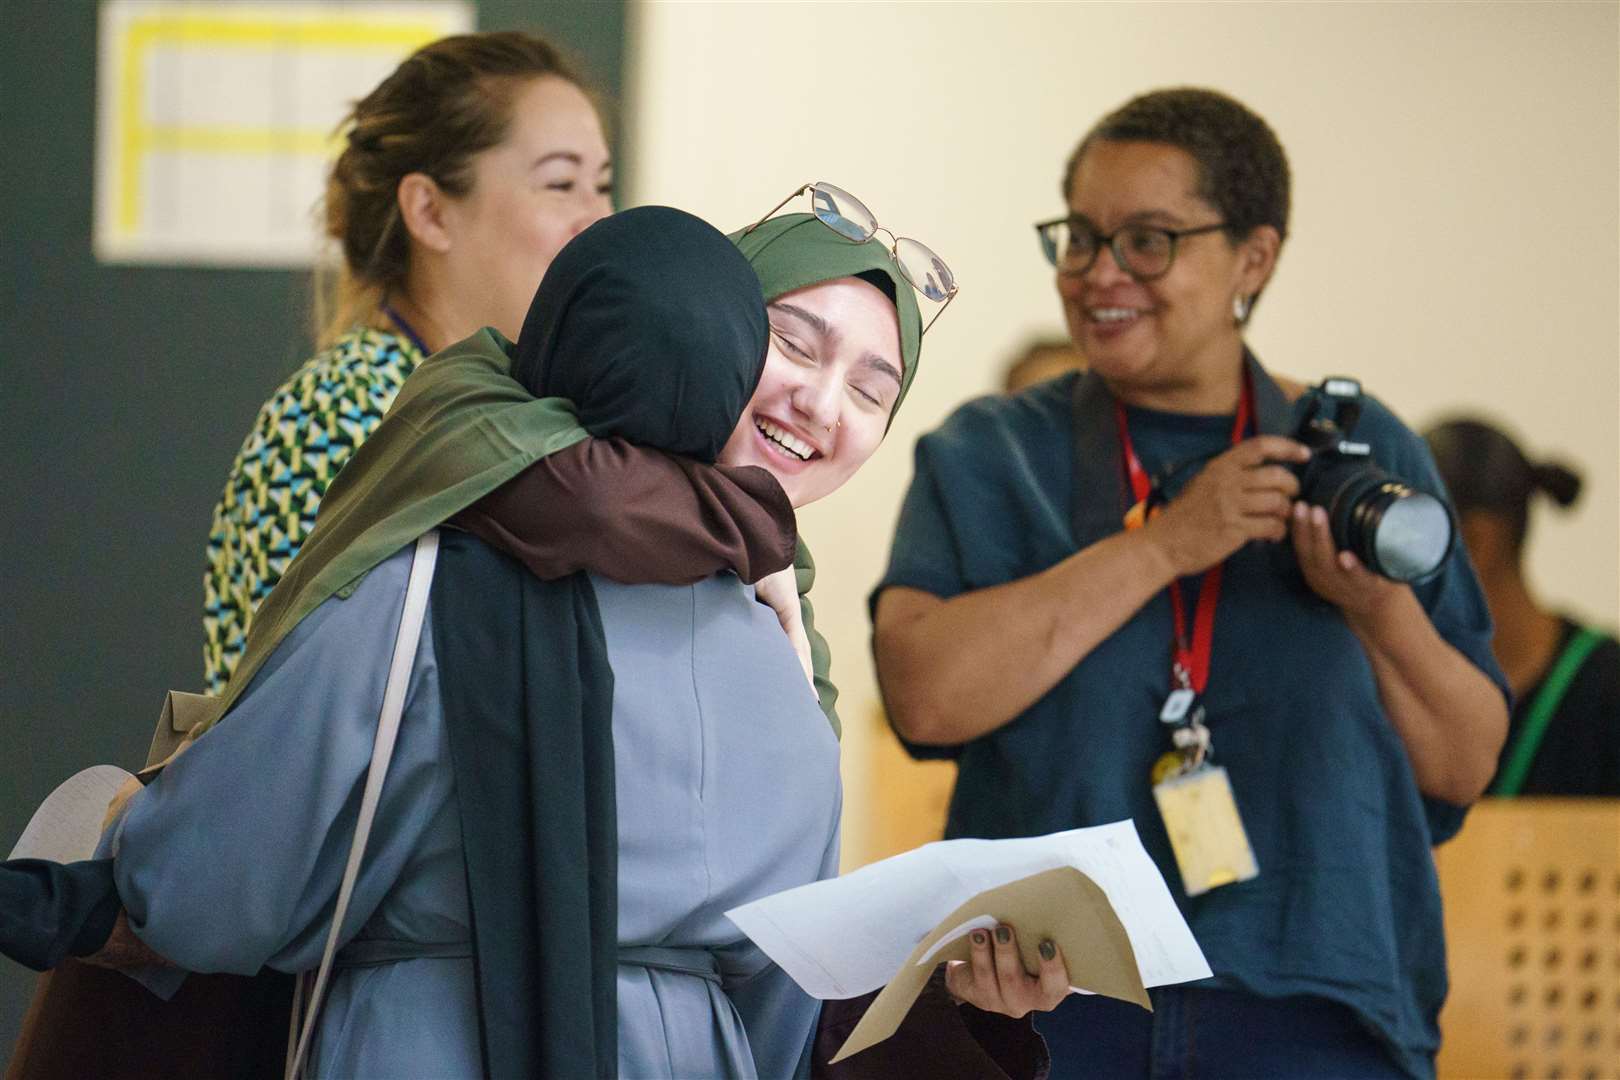 Elanur Tankisi, centre, is congratulated as she receives her A-level results at Oasis Academy Hadley, Enfield, north London (Dominic Lipinski/PA)